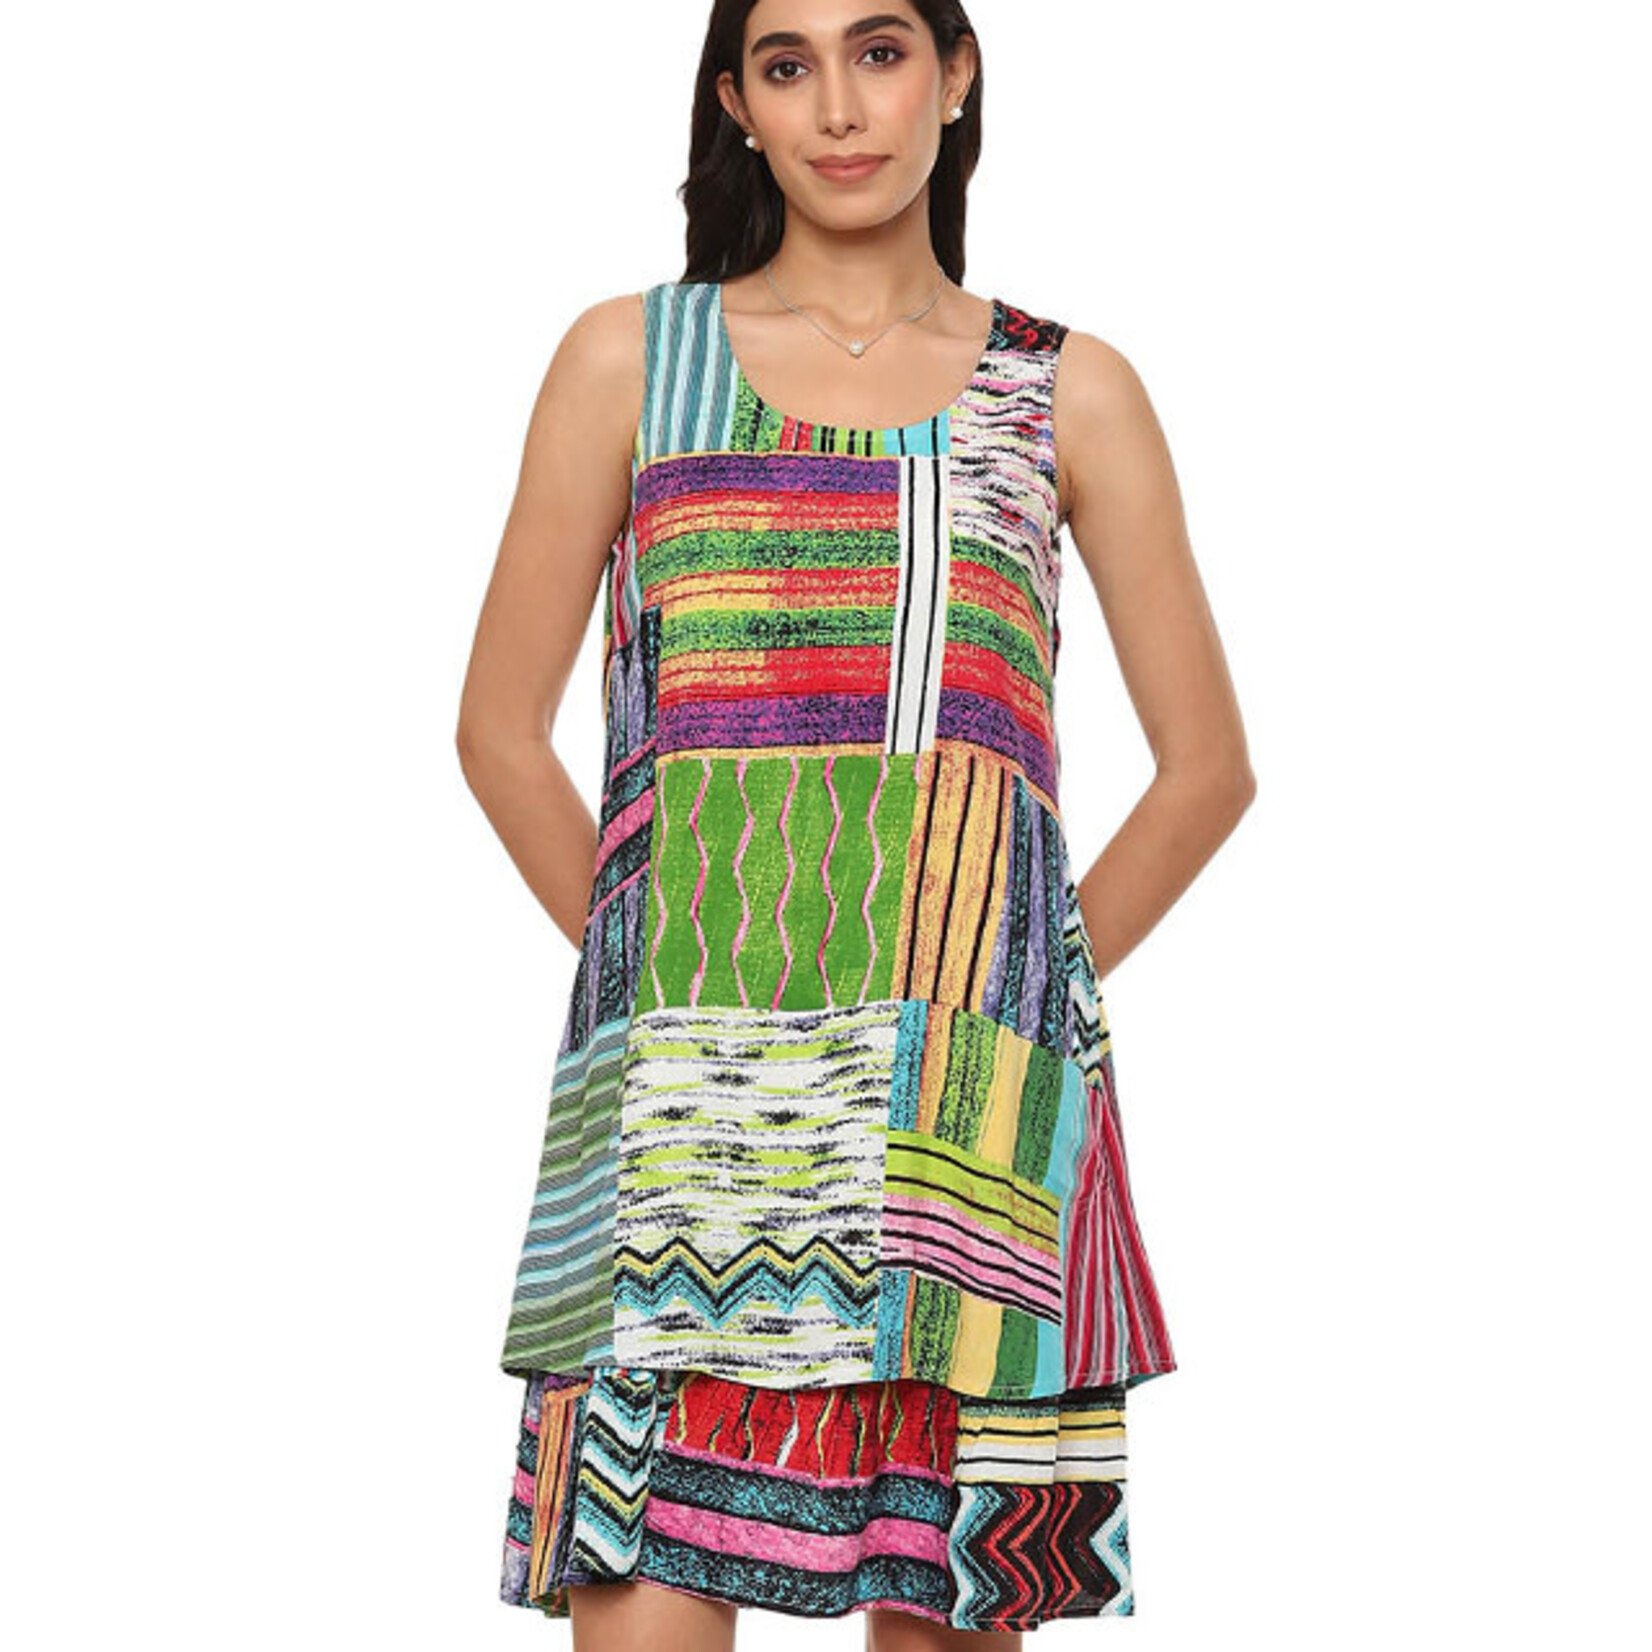 Parsley and Sage Bold Colorful Sleeveless Ellen Dress